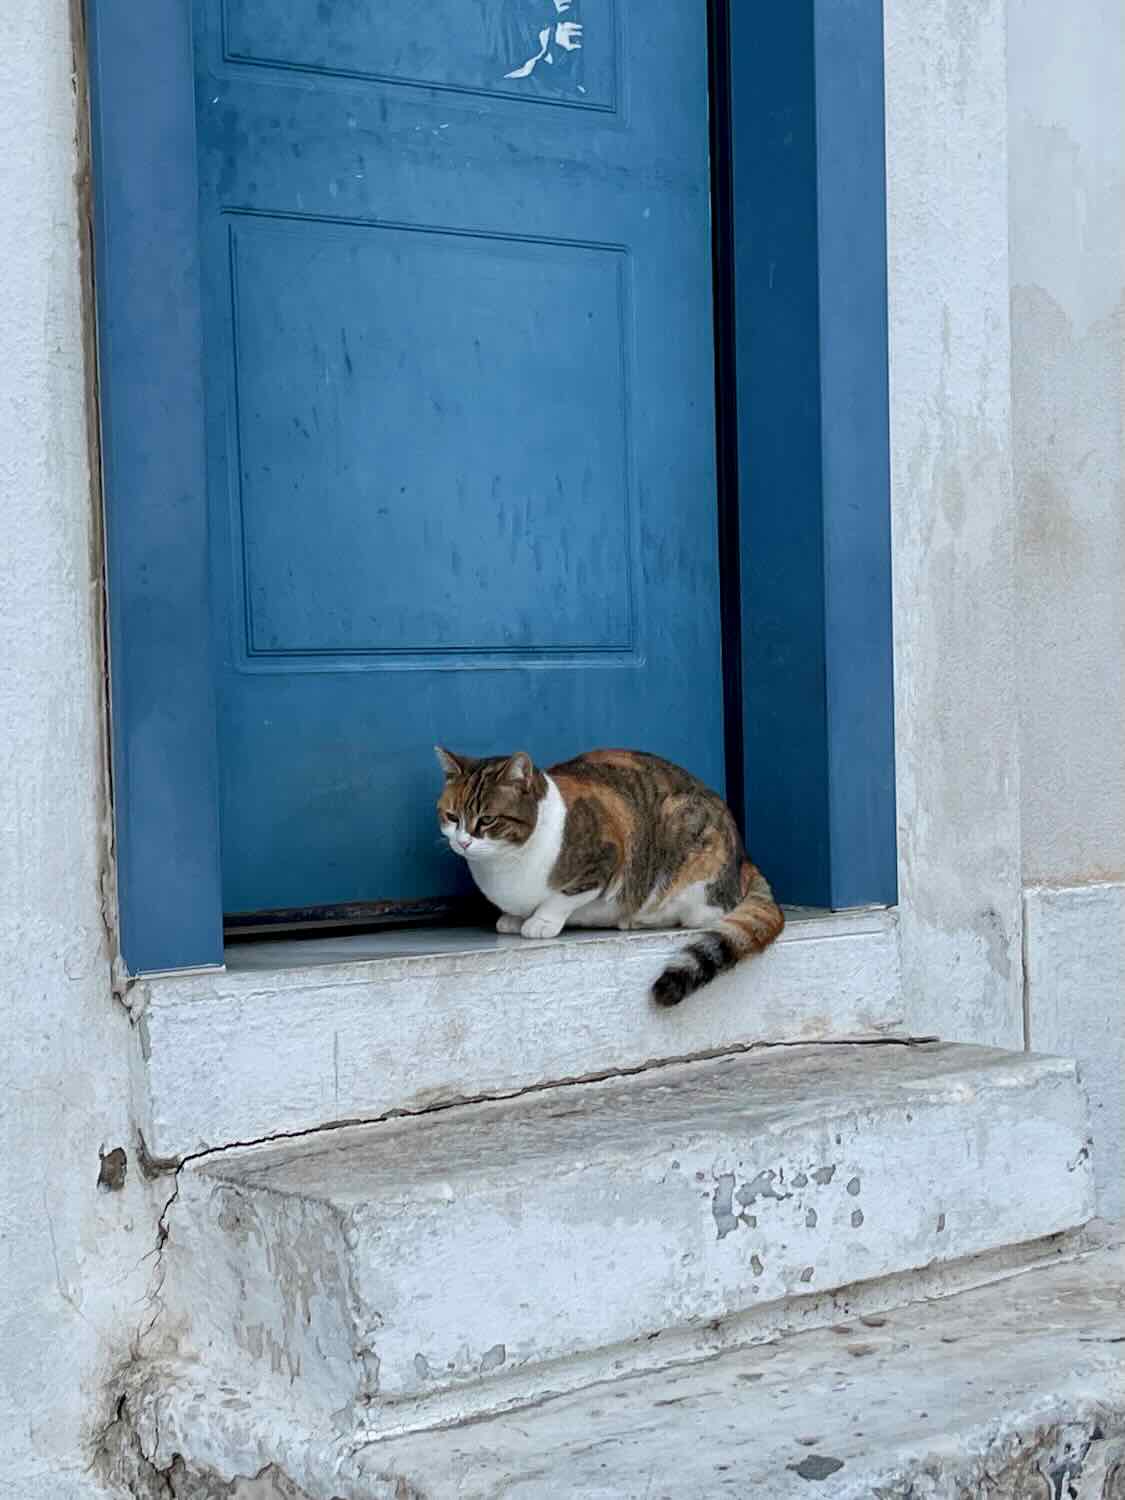 A cat sitting on the steps in front of a blue door, with weathered white walls surrounding the entrance, located in the Plaka neighborhood of Athens, Greece.